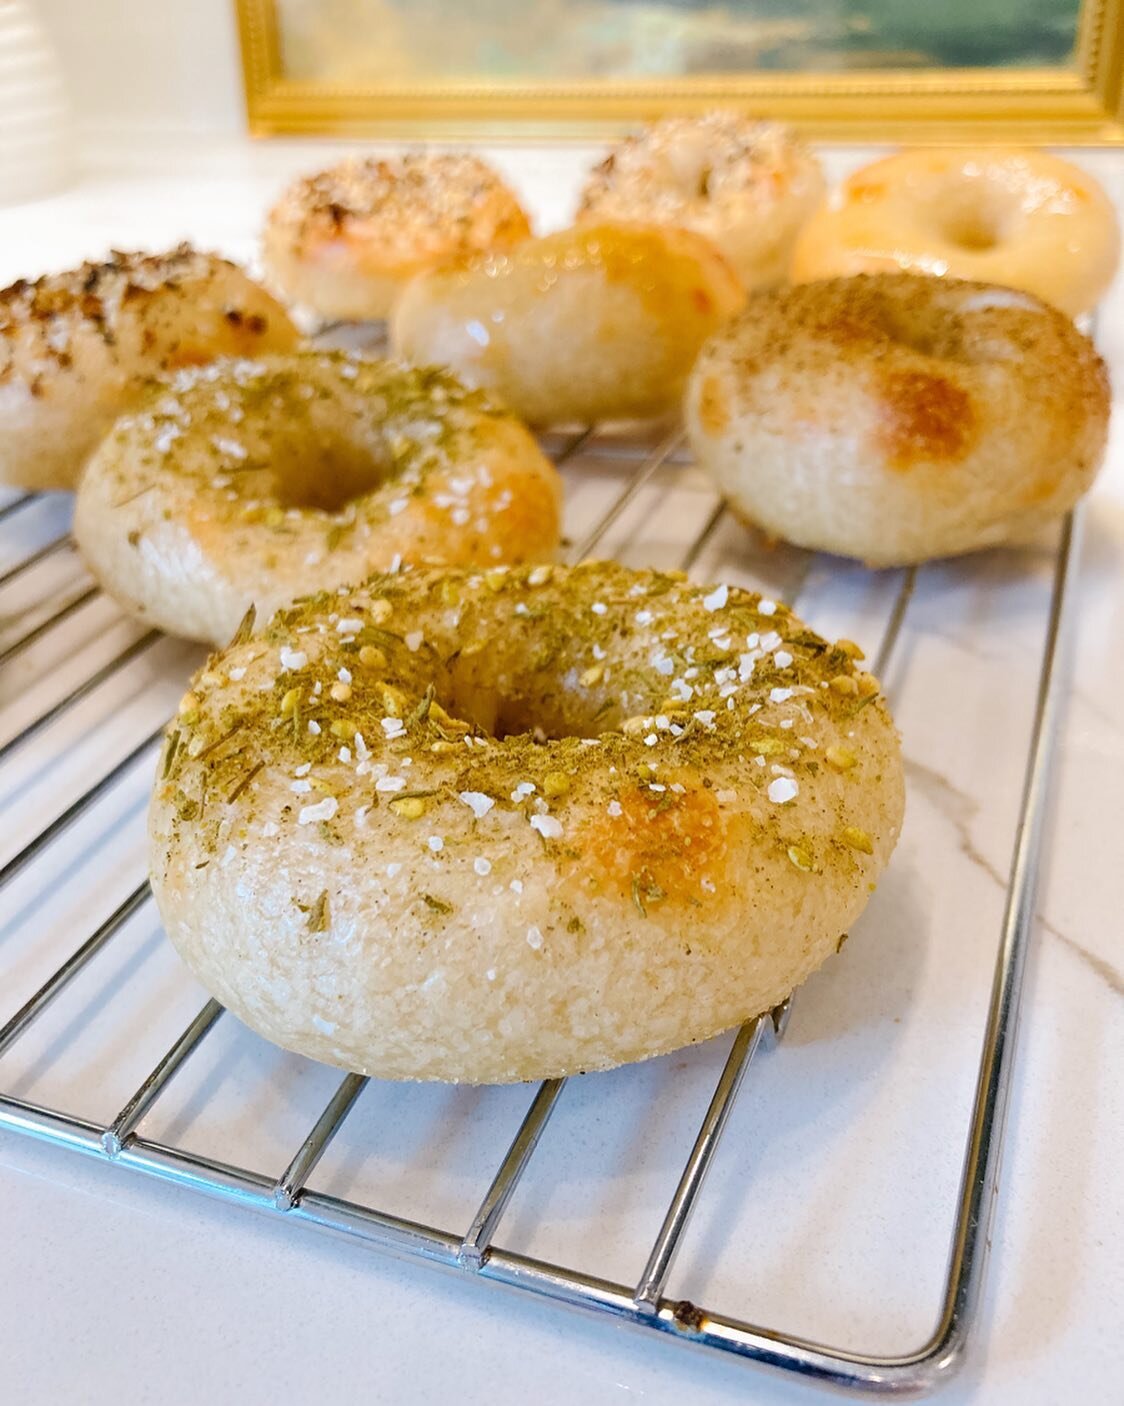 Testing mini bagels for a fun pop up @table_bar on October 22!!! Stay tuned!